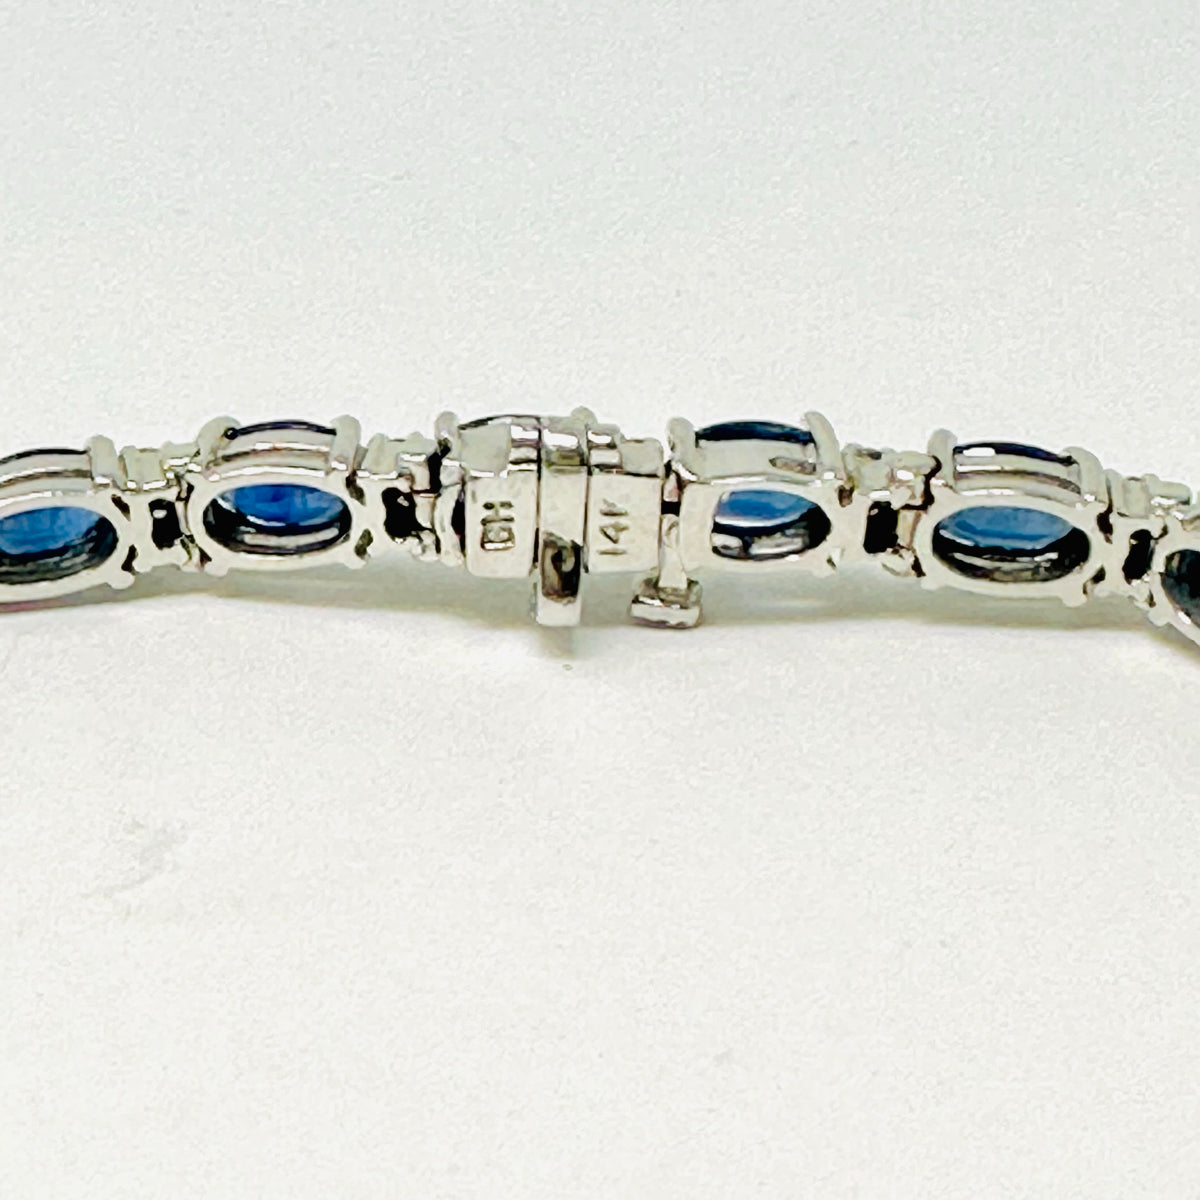 14K White Gold Bracelet with Sapphires and Diamonds